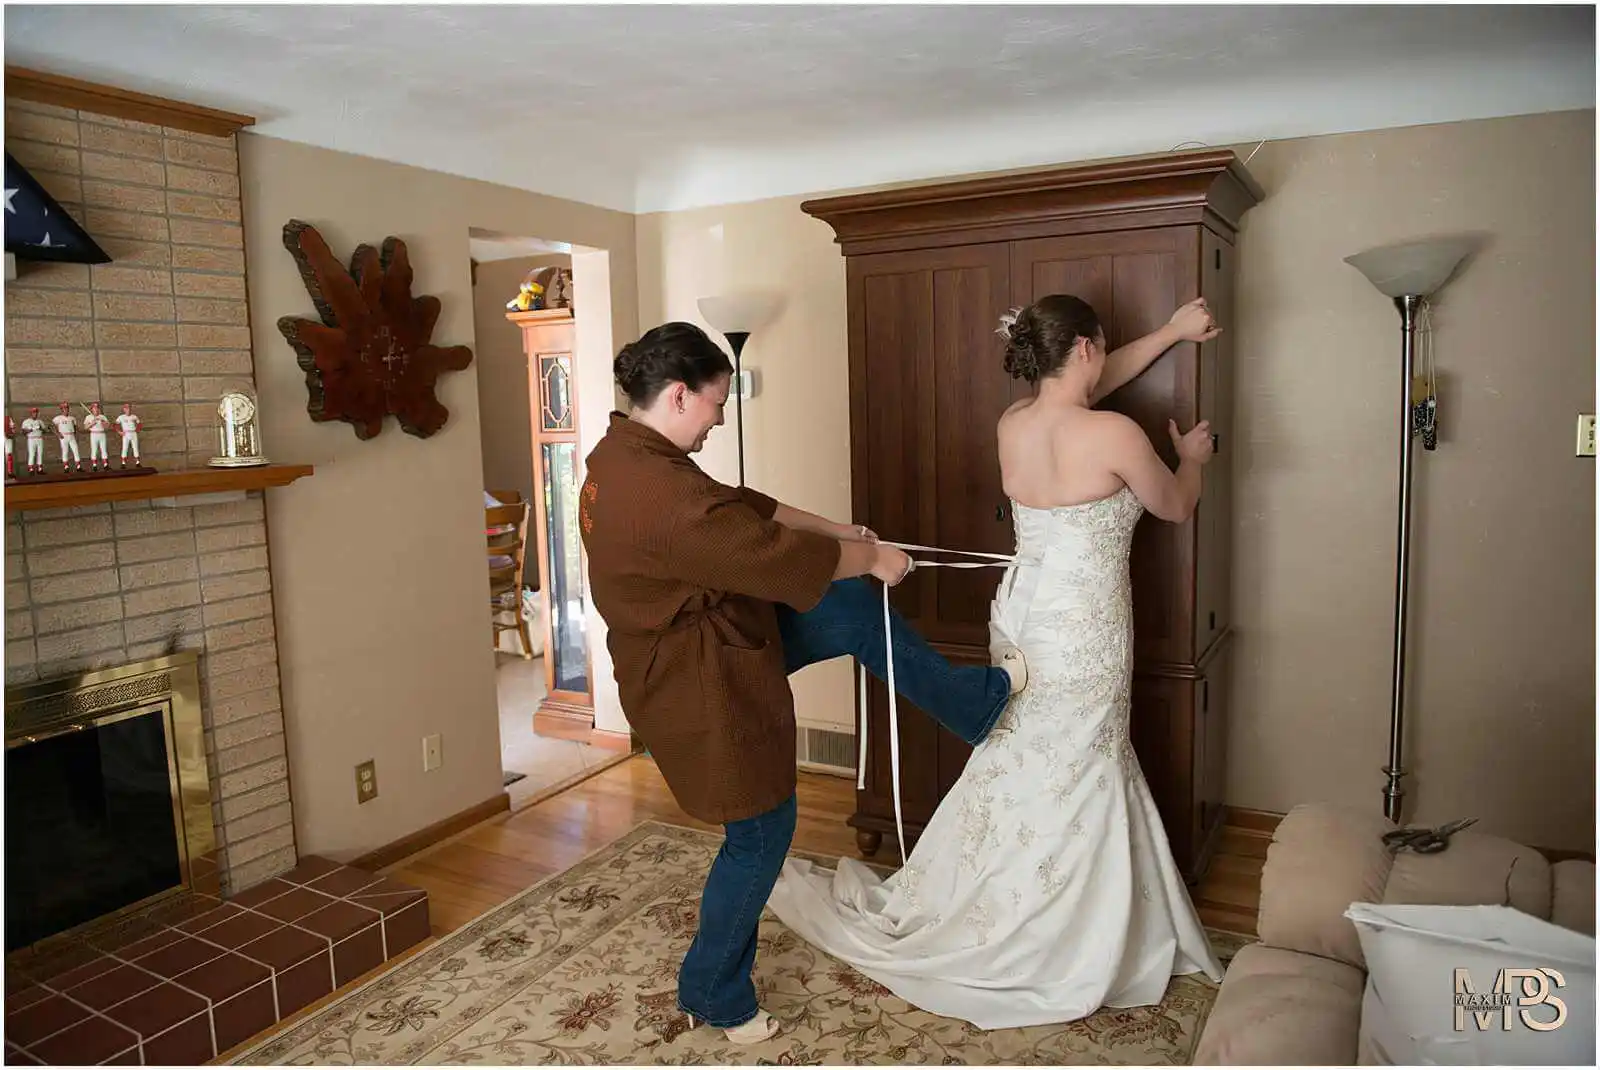 Bride preparing for wedding with assistance.